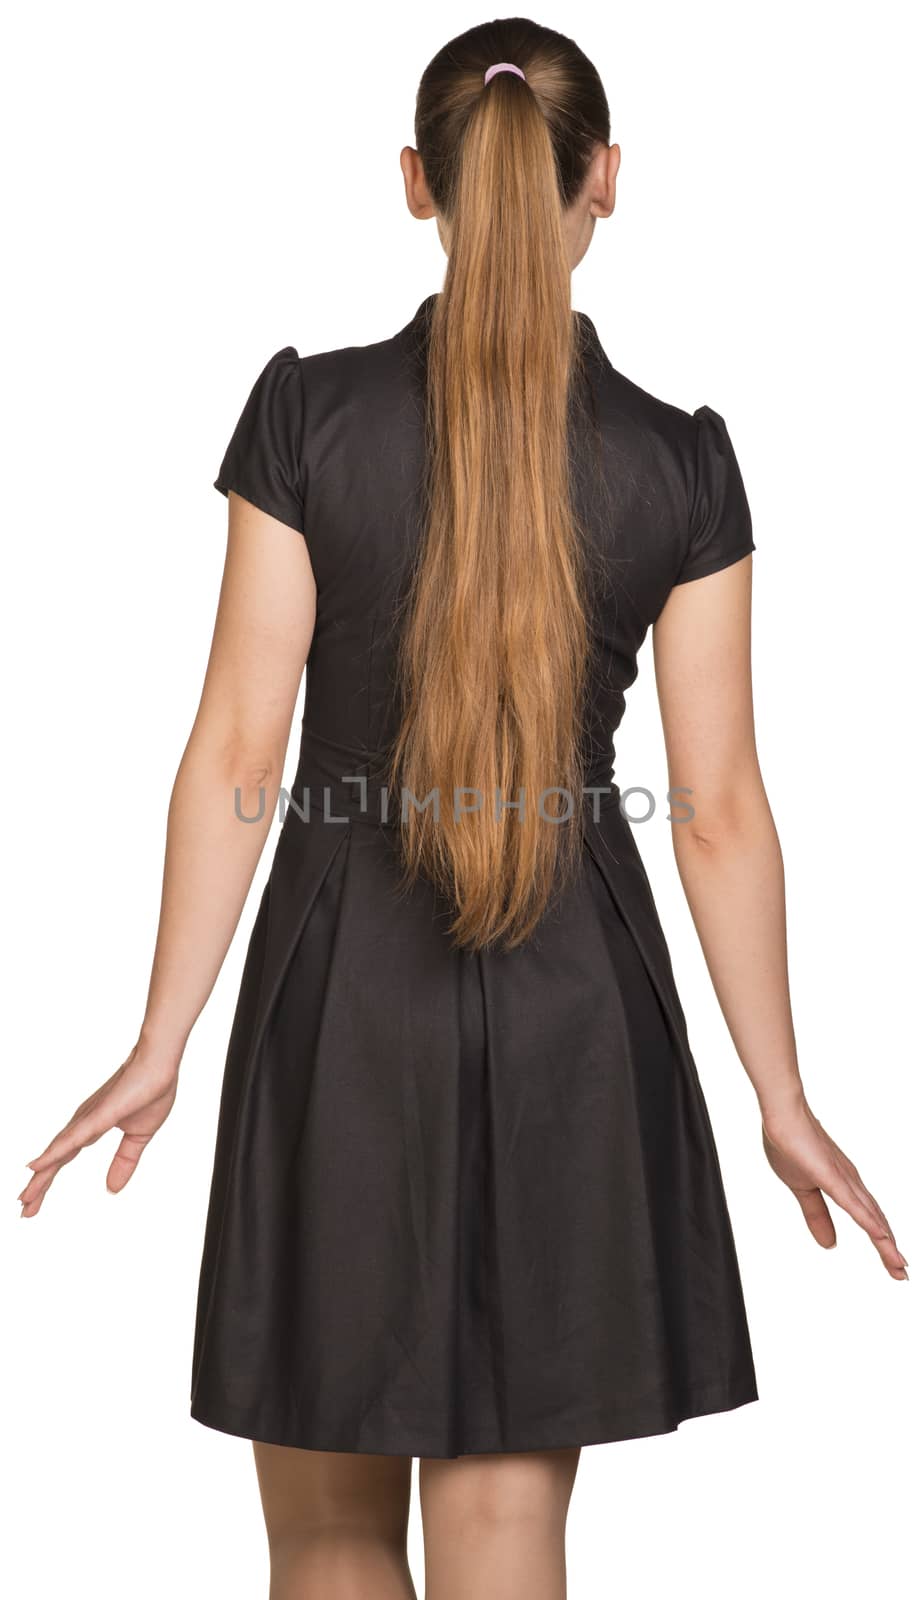 Attractive young woman in black dress. Rear view by cherezoff